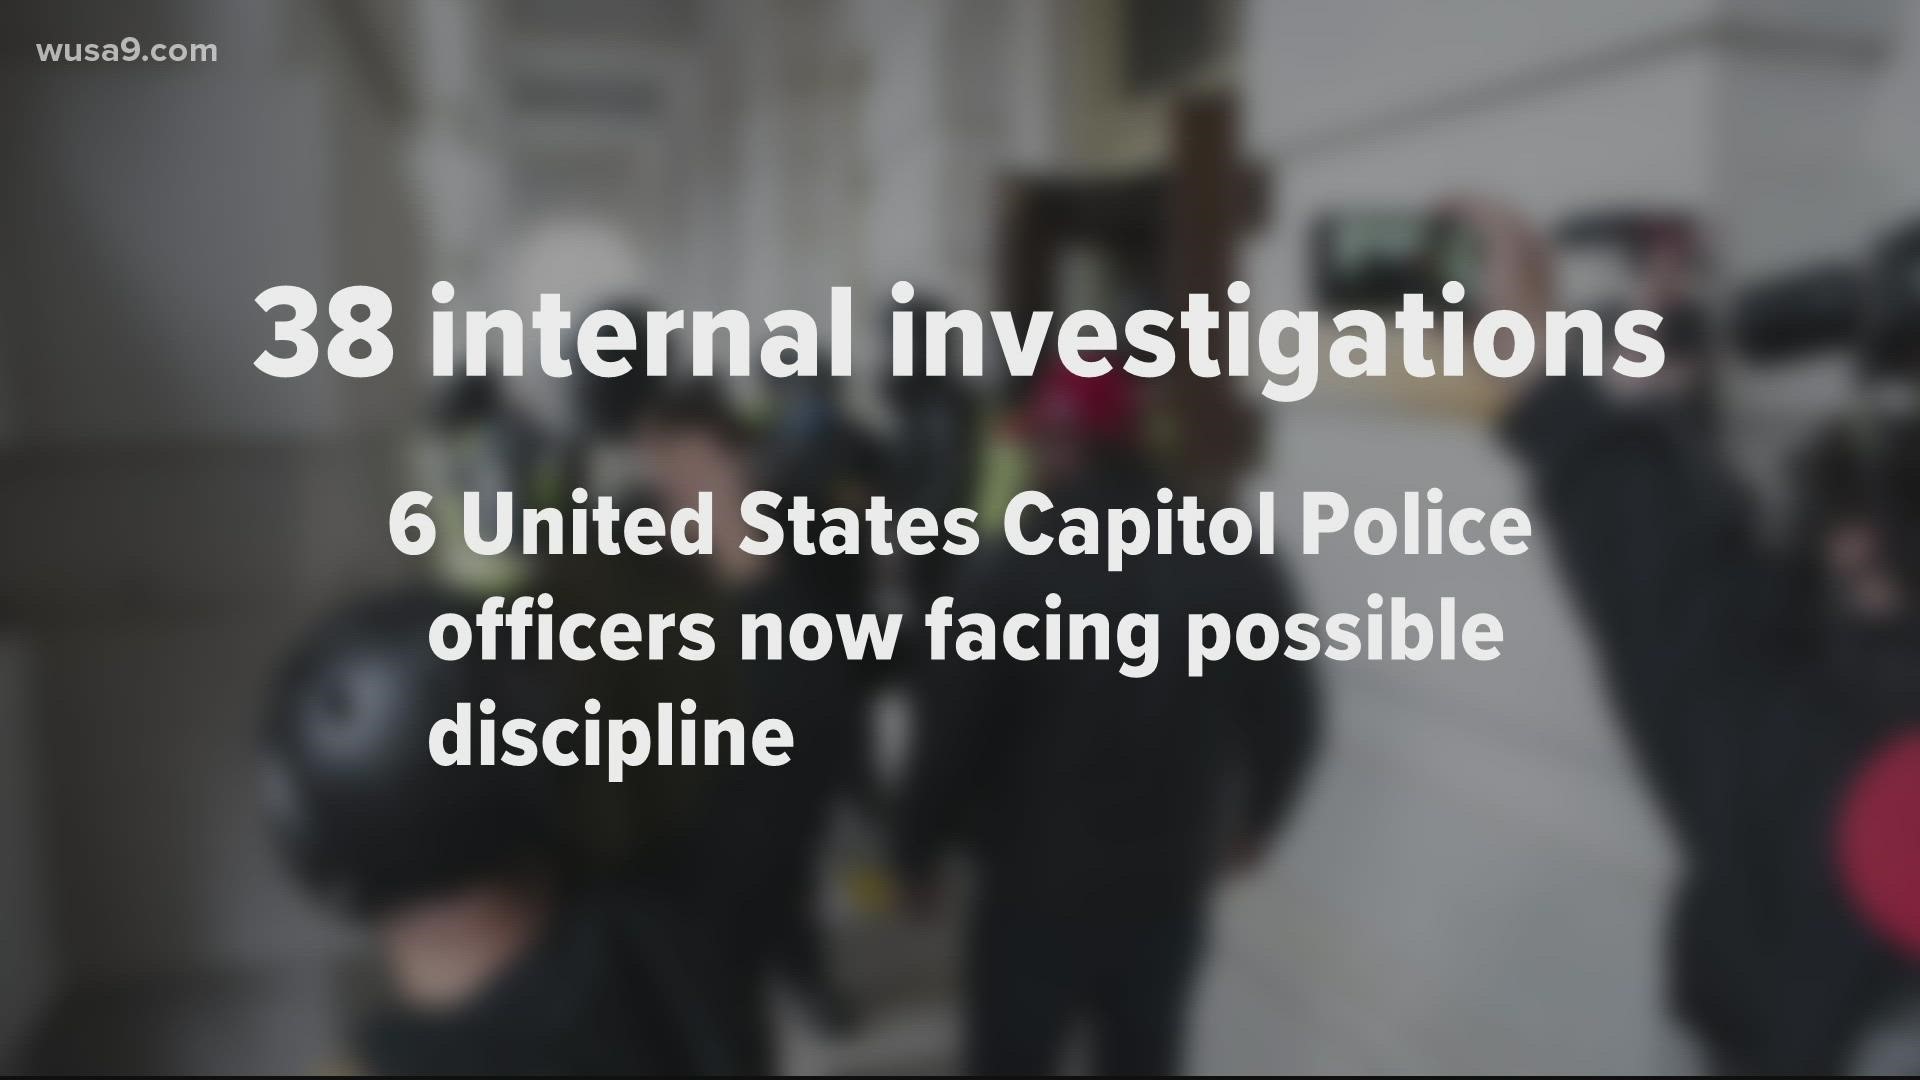 Federal prosecutors have told a judge they will need to review evidence against the officers to determine if the actions will impact prosecutions.